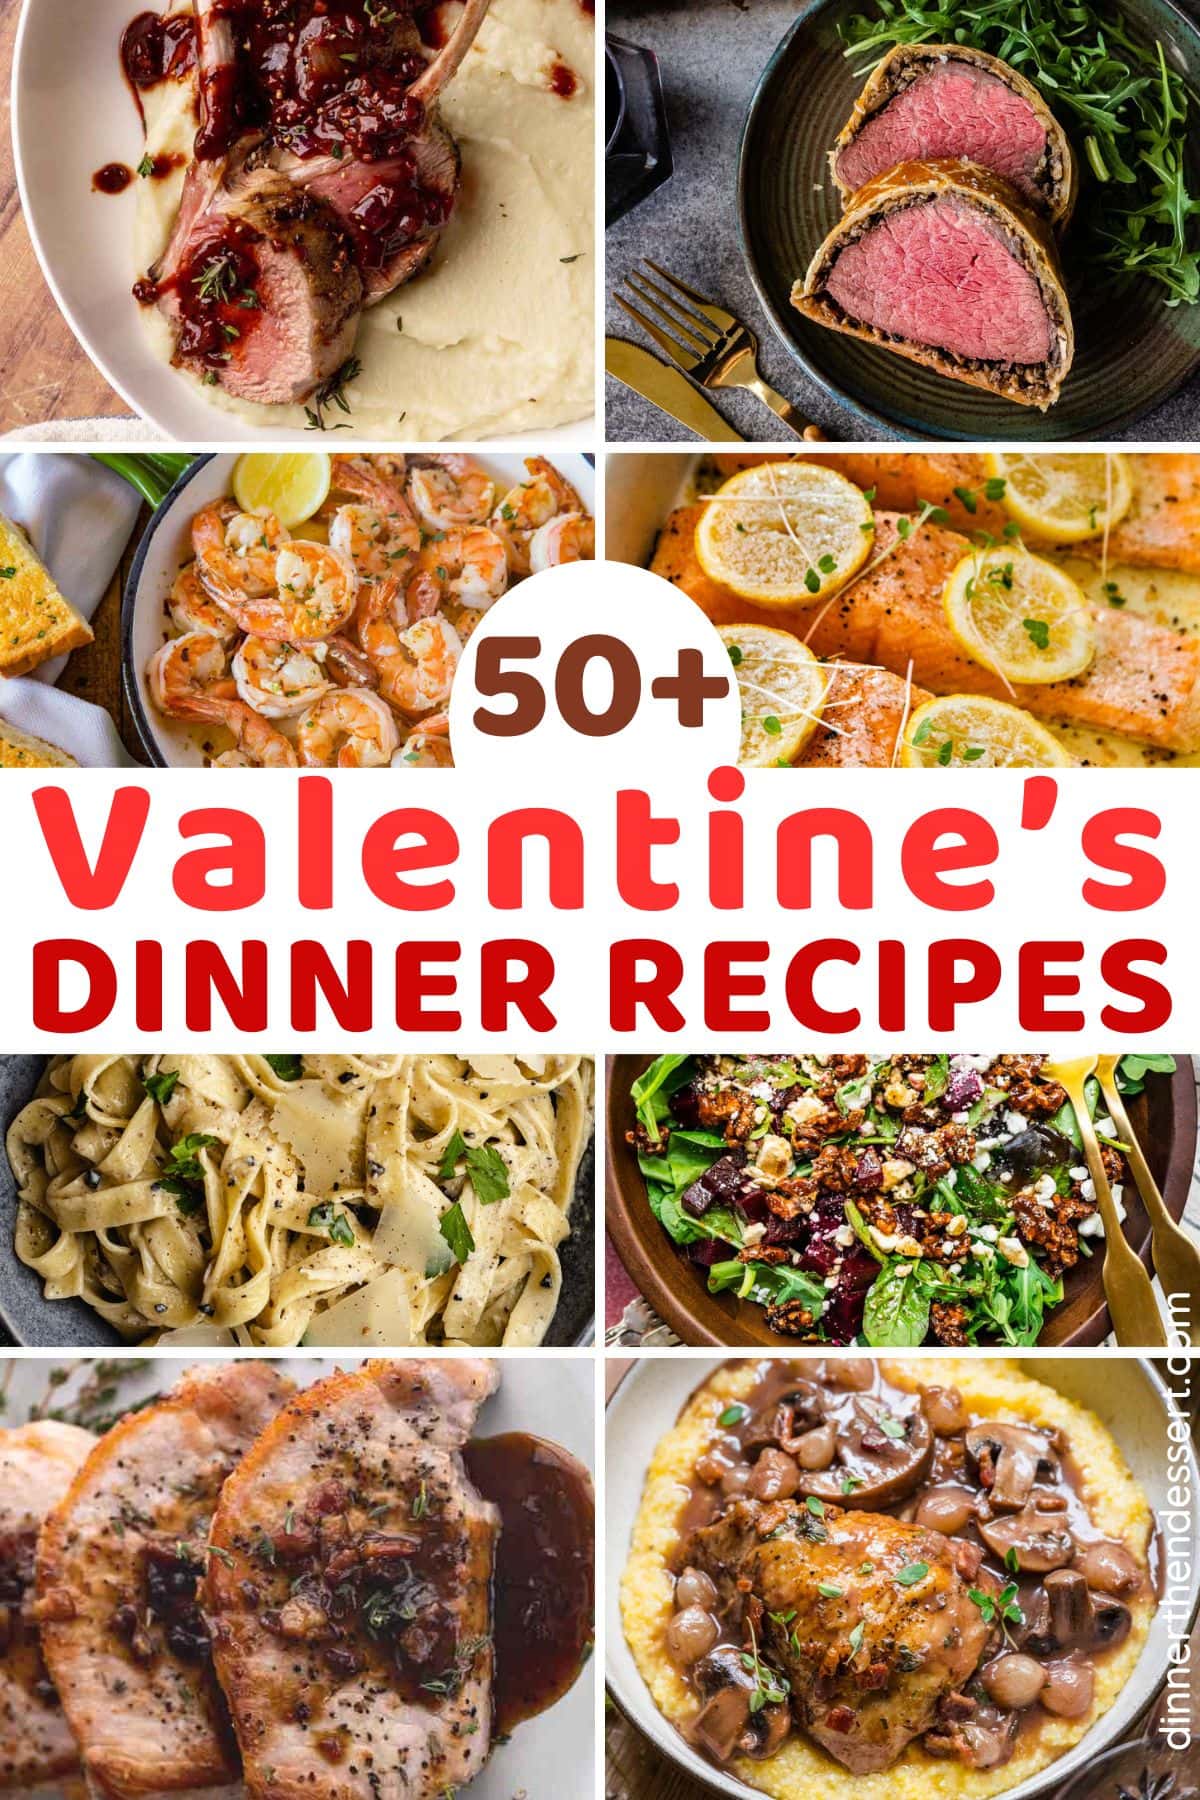 40+ Valentines Day Dinners collage of featured recipes in the collection